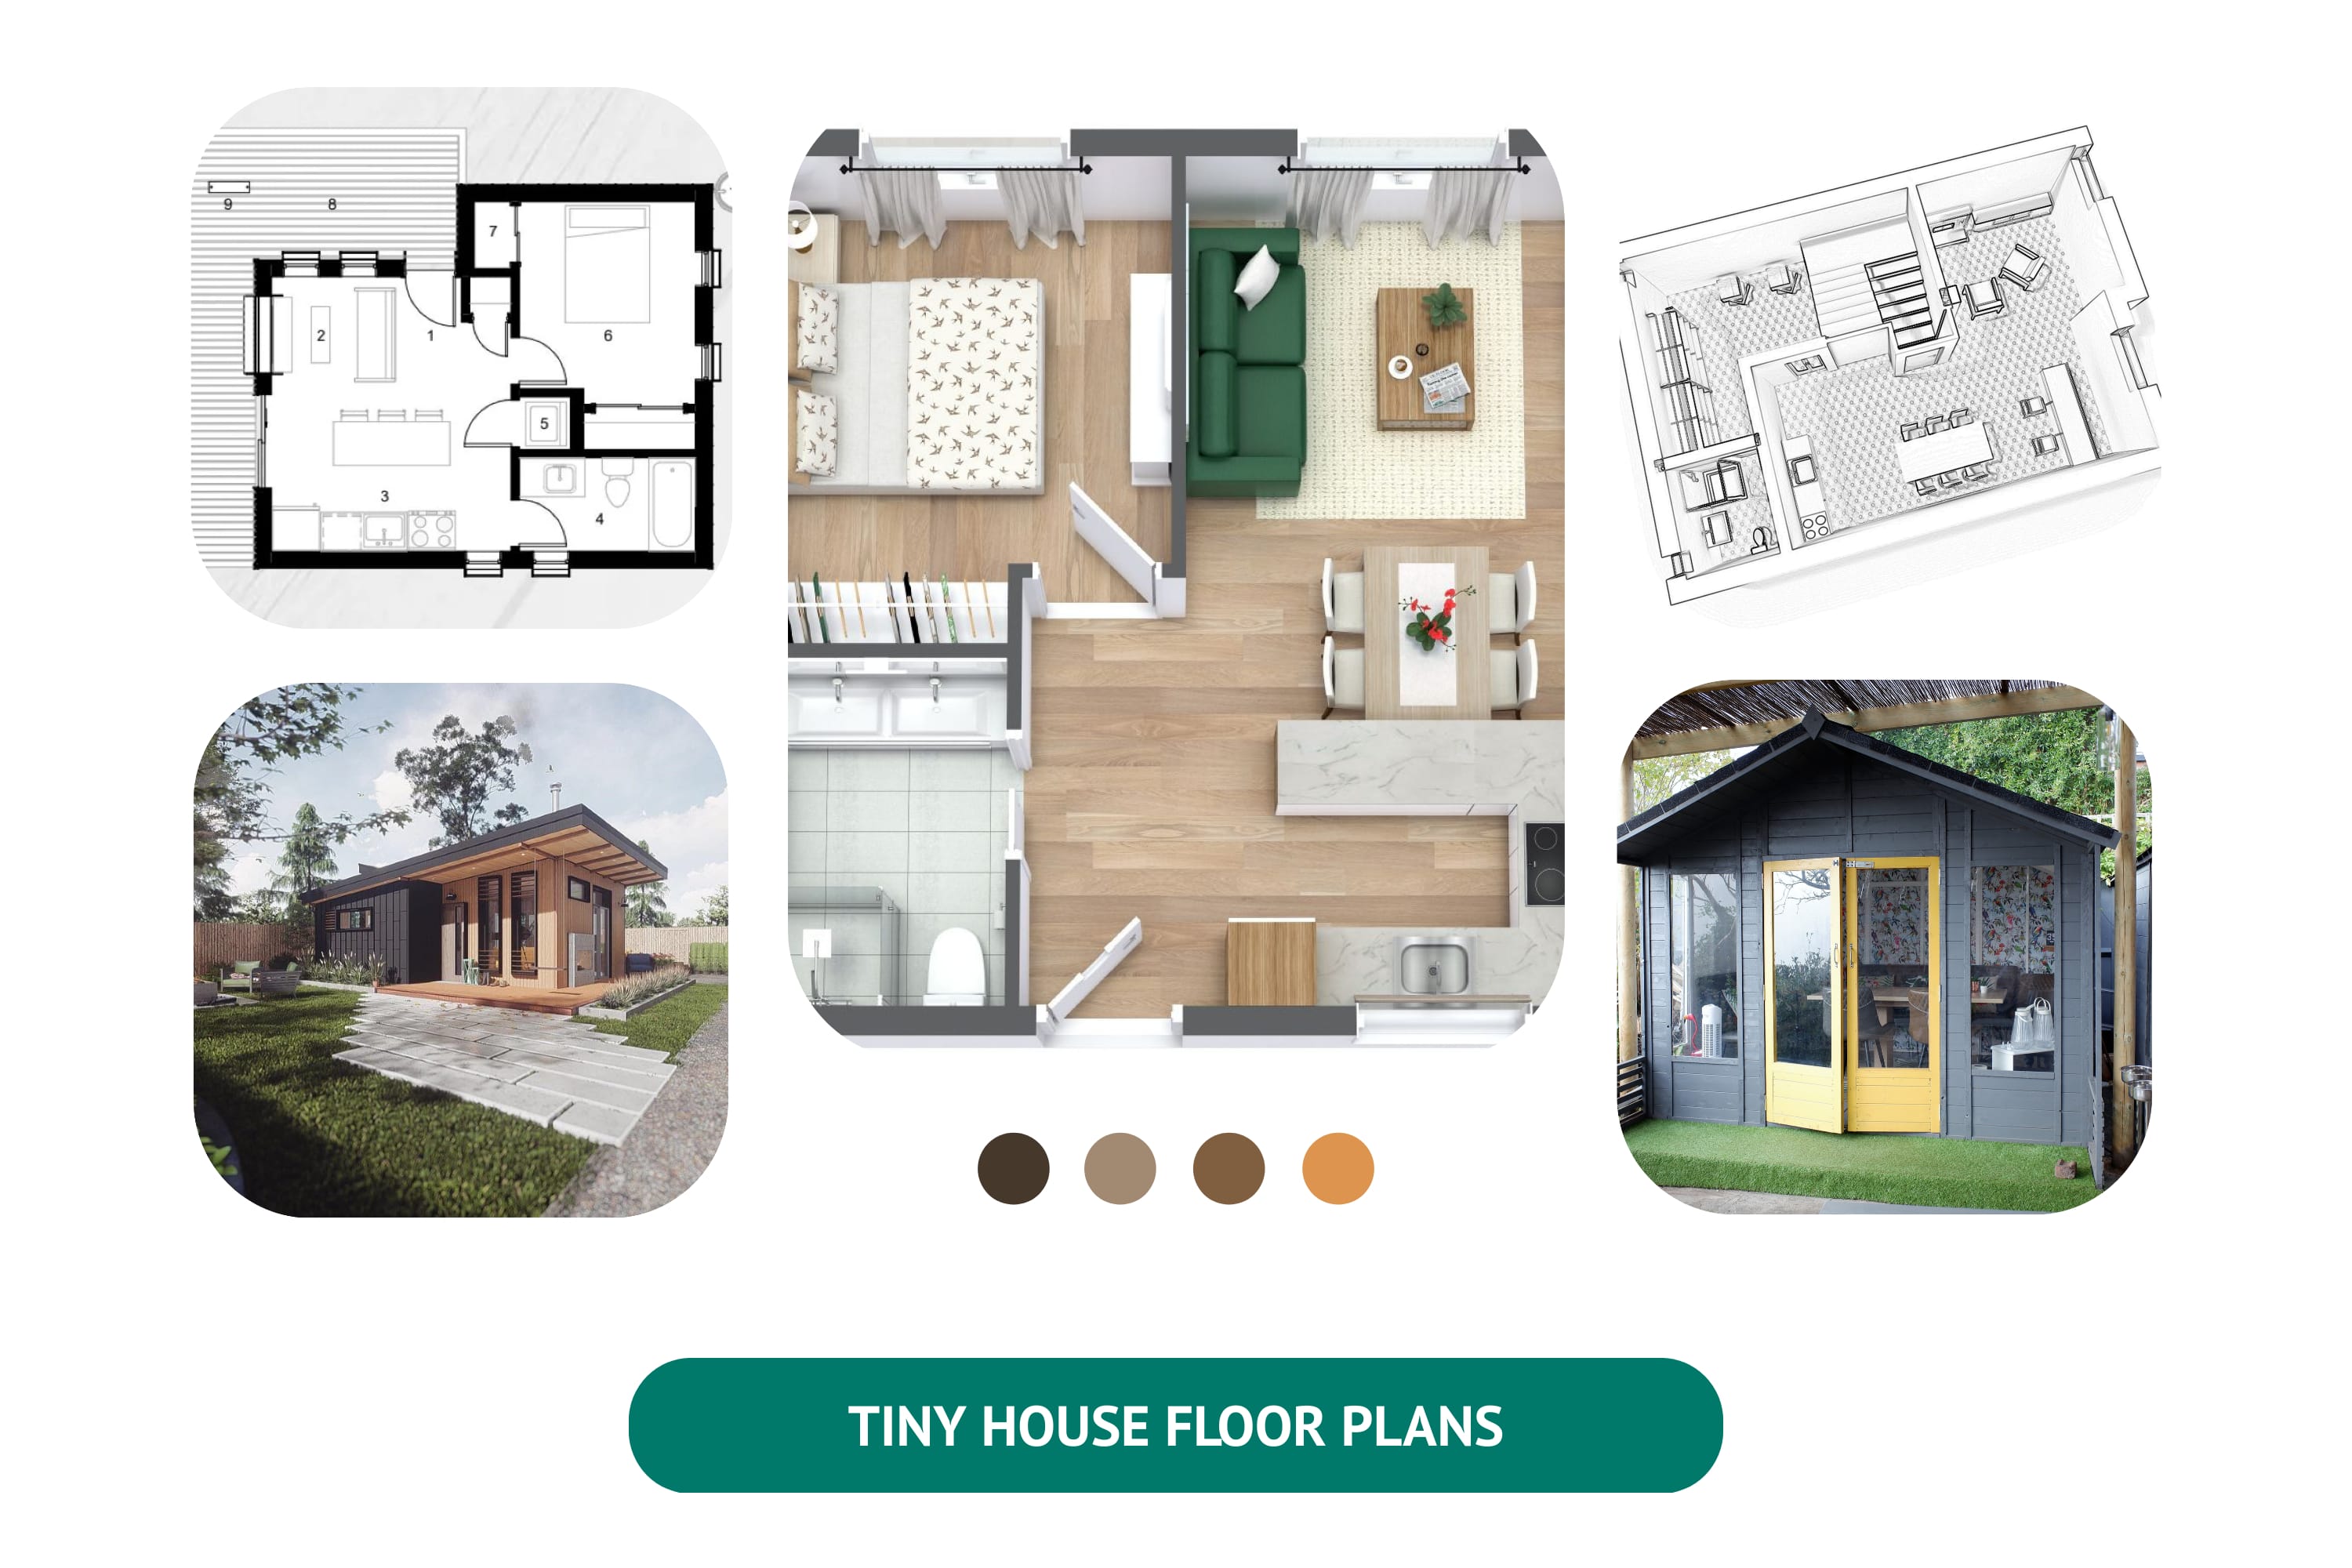 tiny home floor plans in the picture